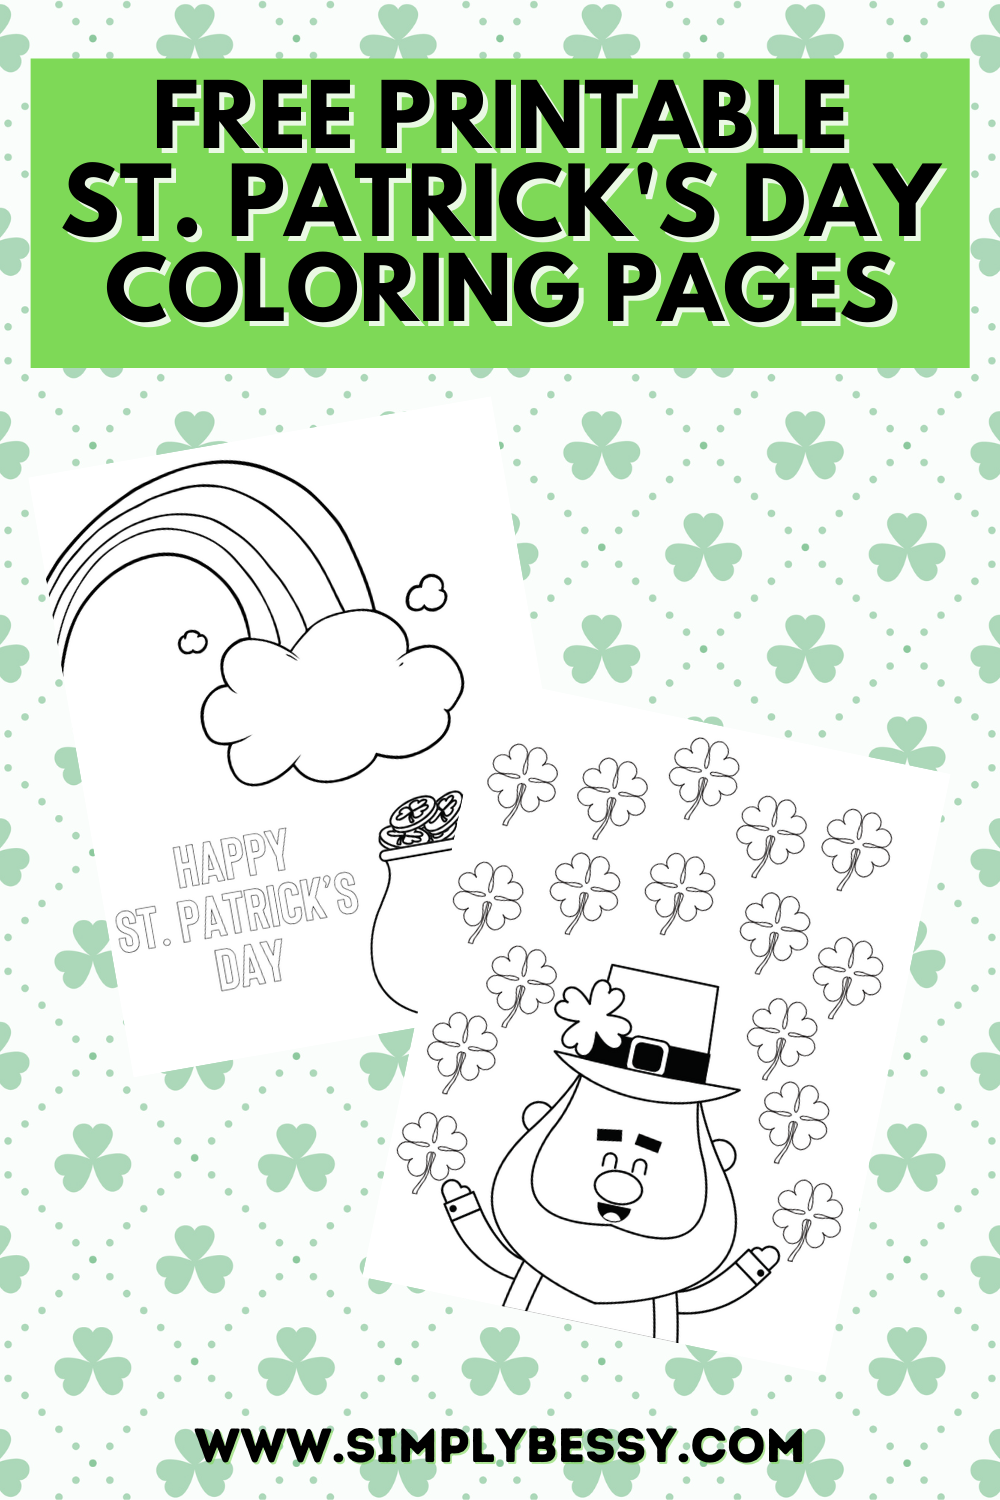 St Patrick's Day Coloring Pages Free Printables Made with HAPPY